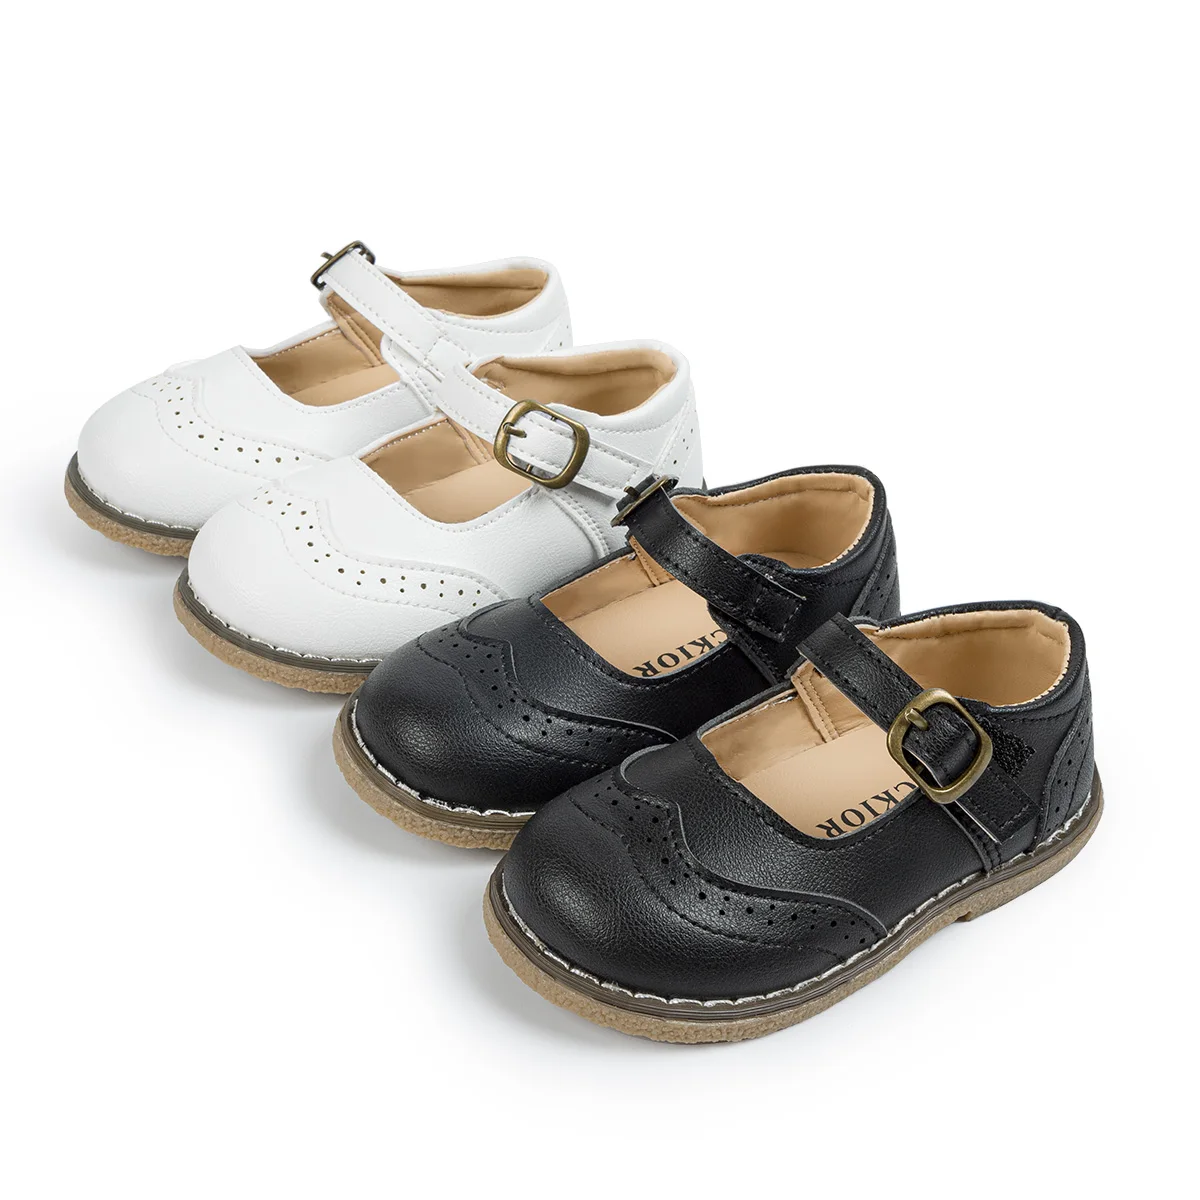 New Products Princess Wedding Black School Shoes Rubber Sole Non-Slip Pu Leather Kids Dress Shoes